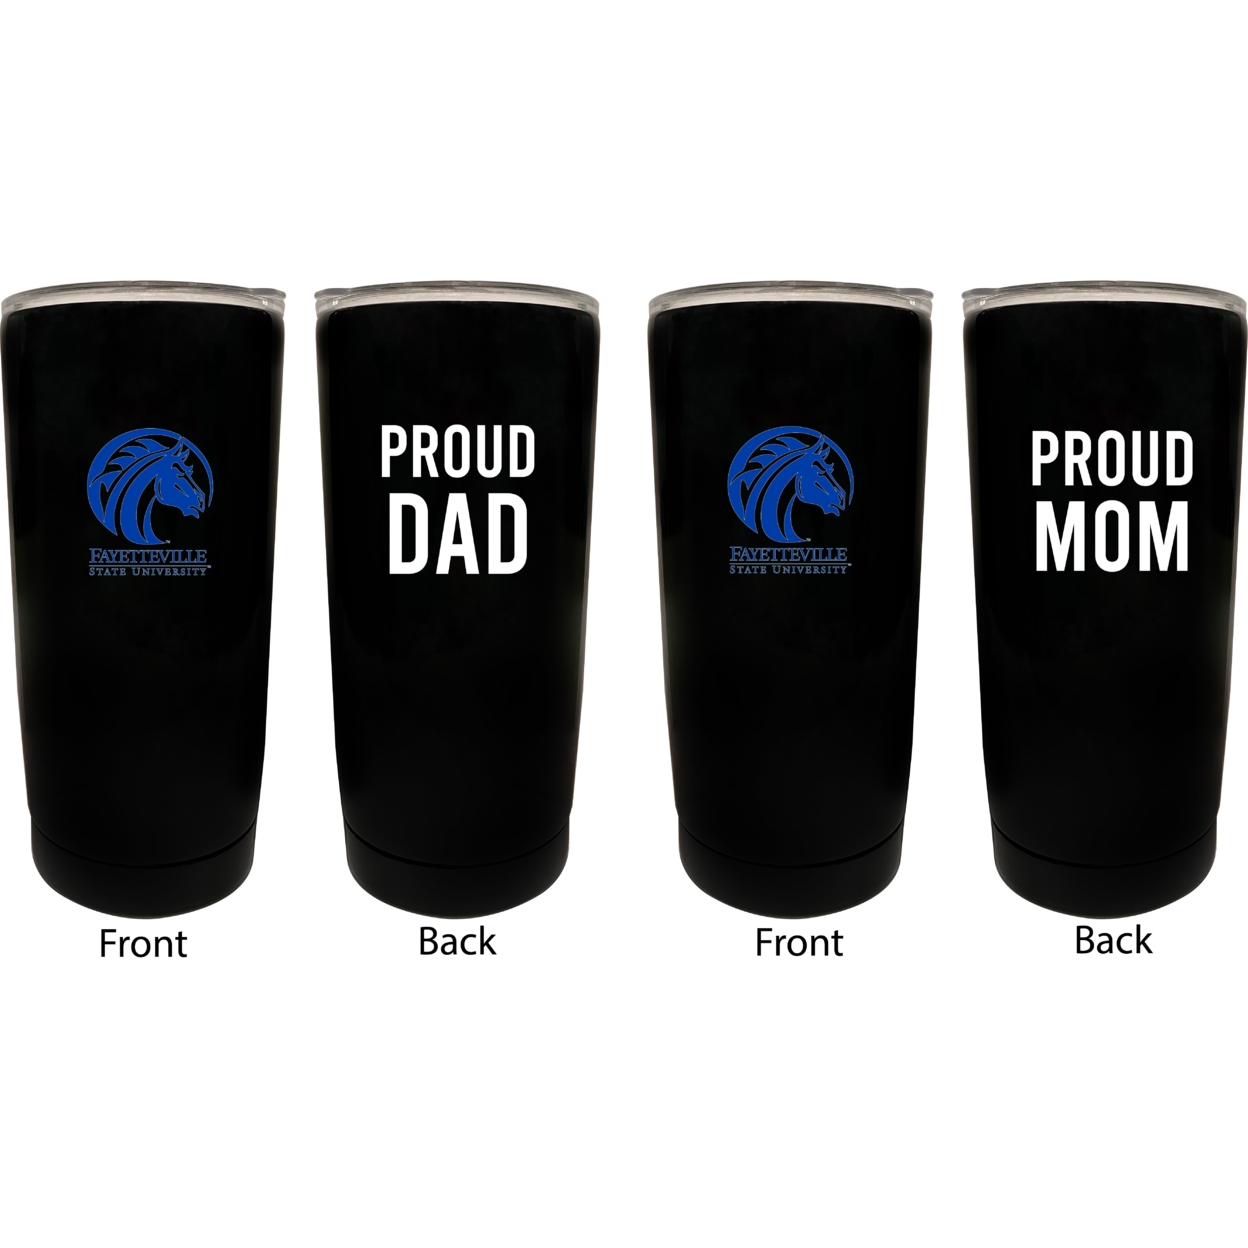 Fayetteville State University Proud Mom And Dad 16 Oz Insulated Stainless Steel Tumblers 2 Pack Black.